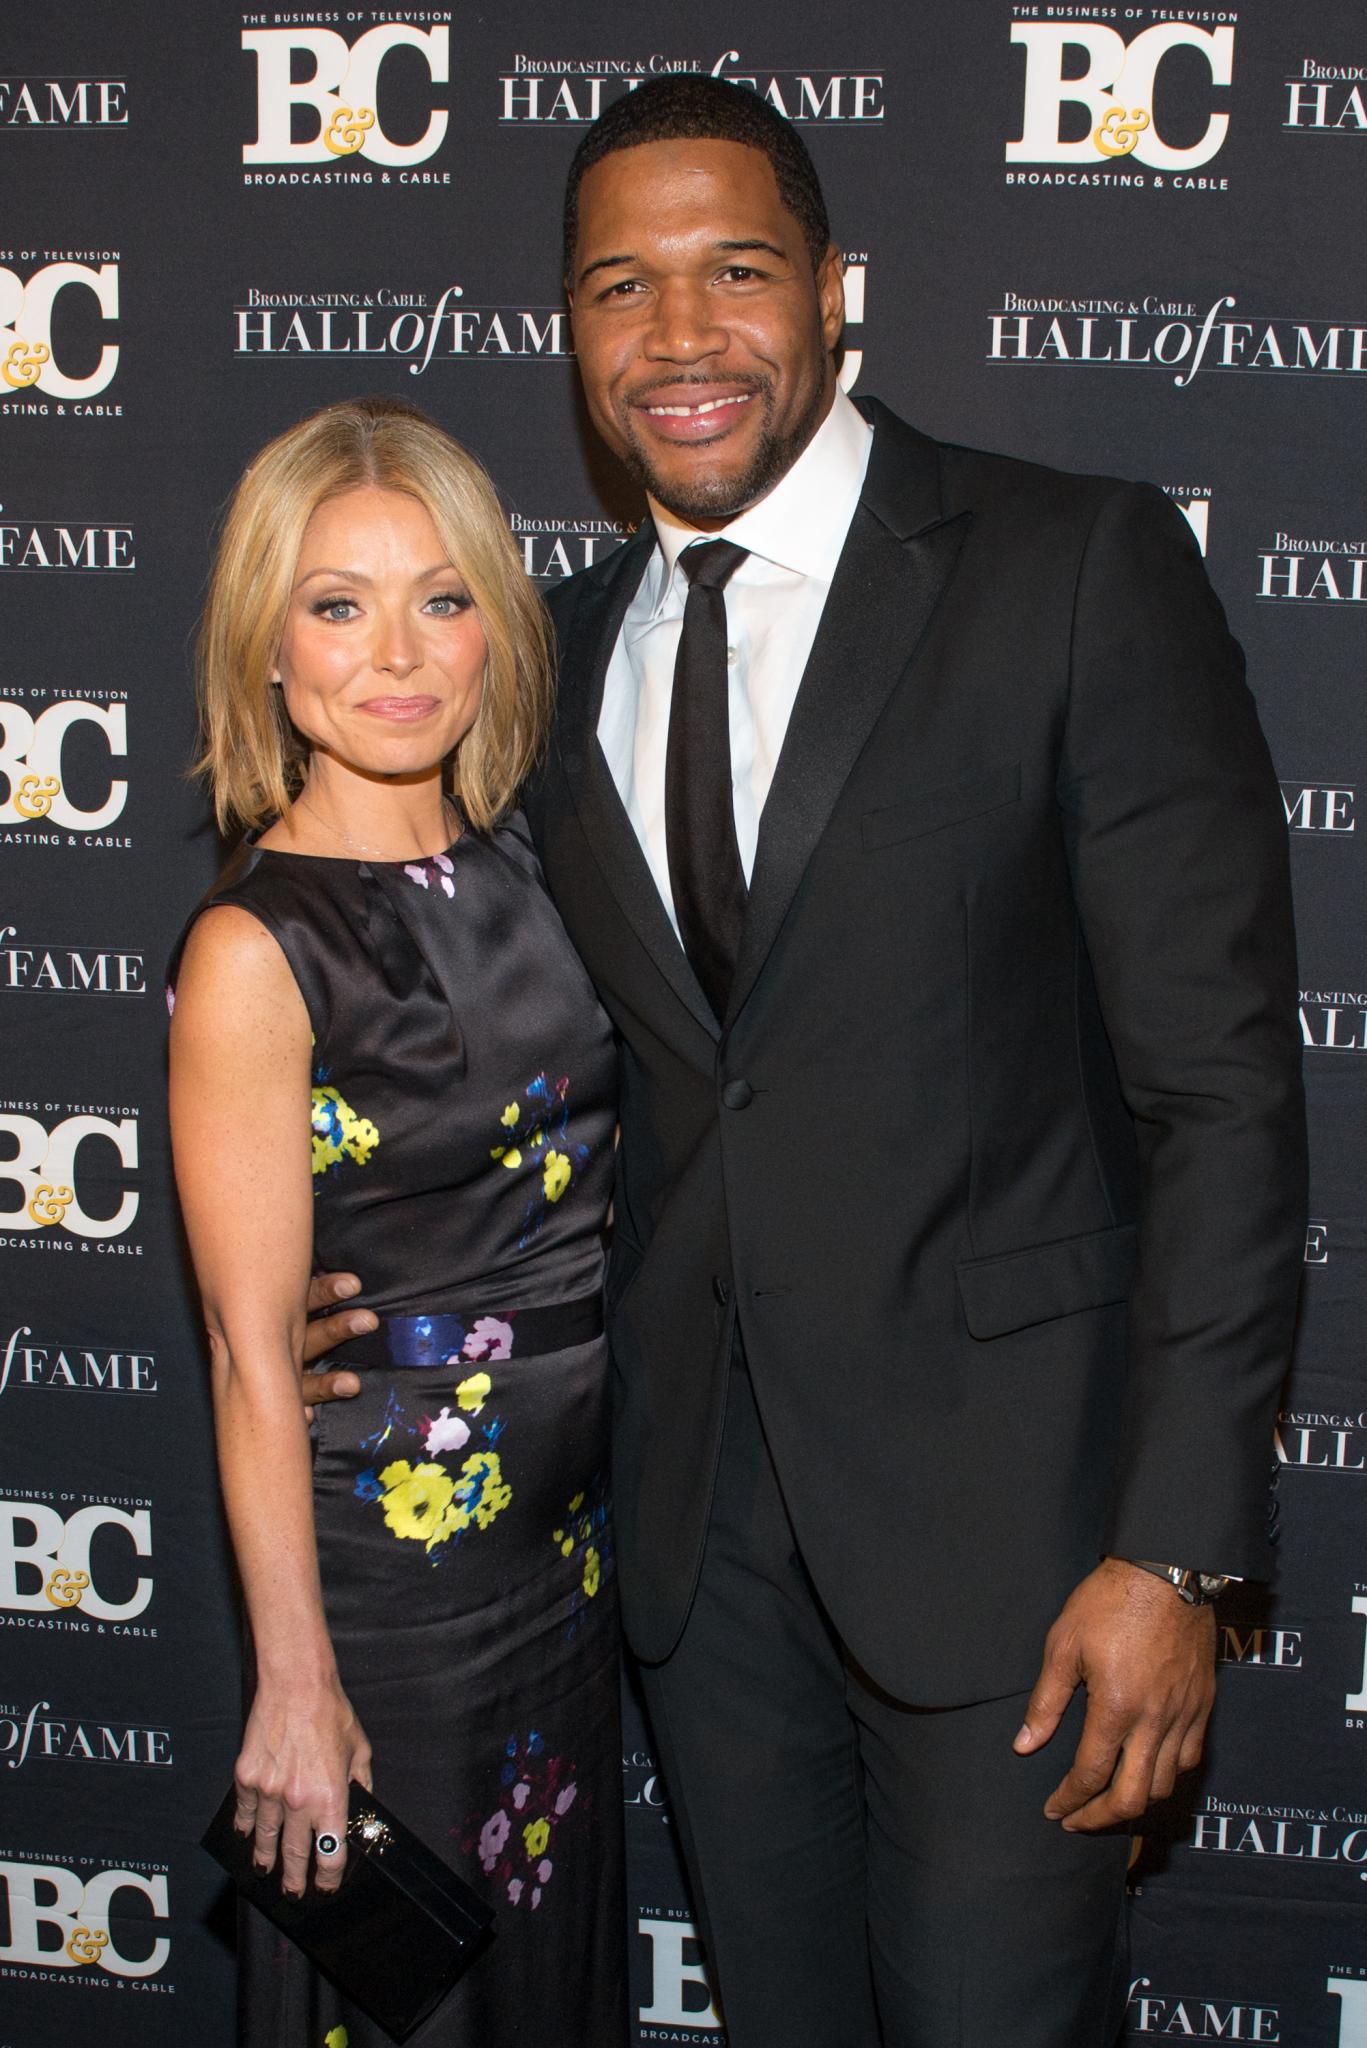 Kelly Ripa is a No Show for 'Live' After Strahan Announcement